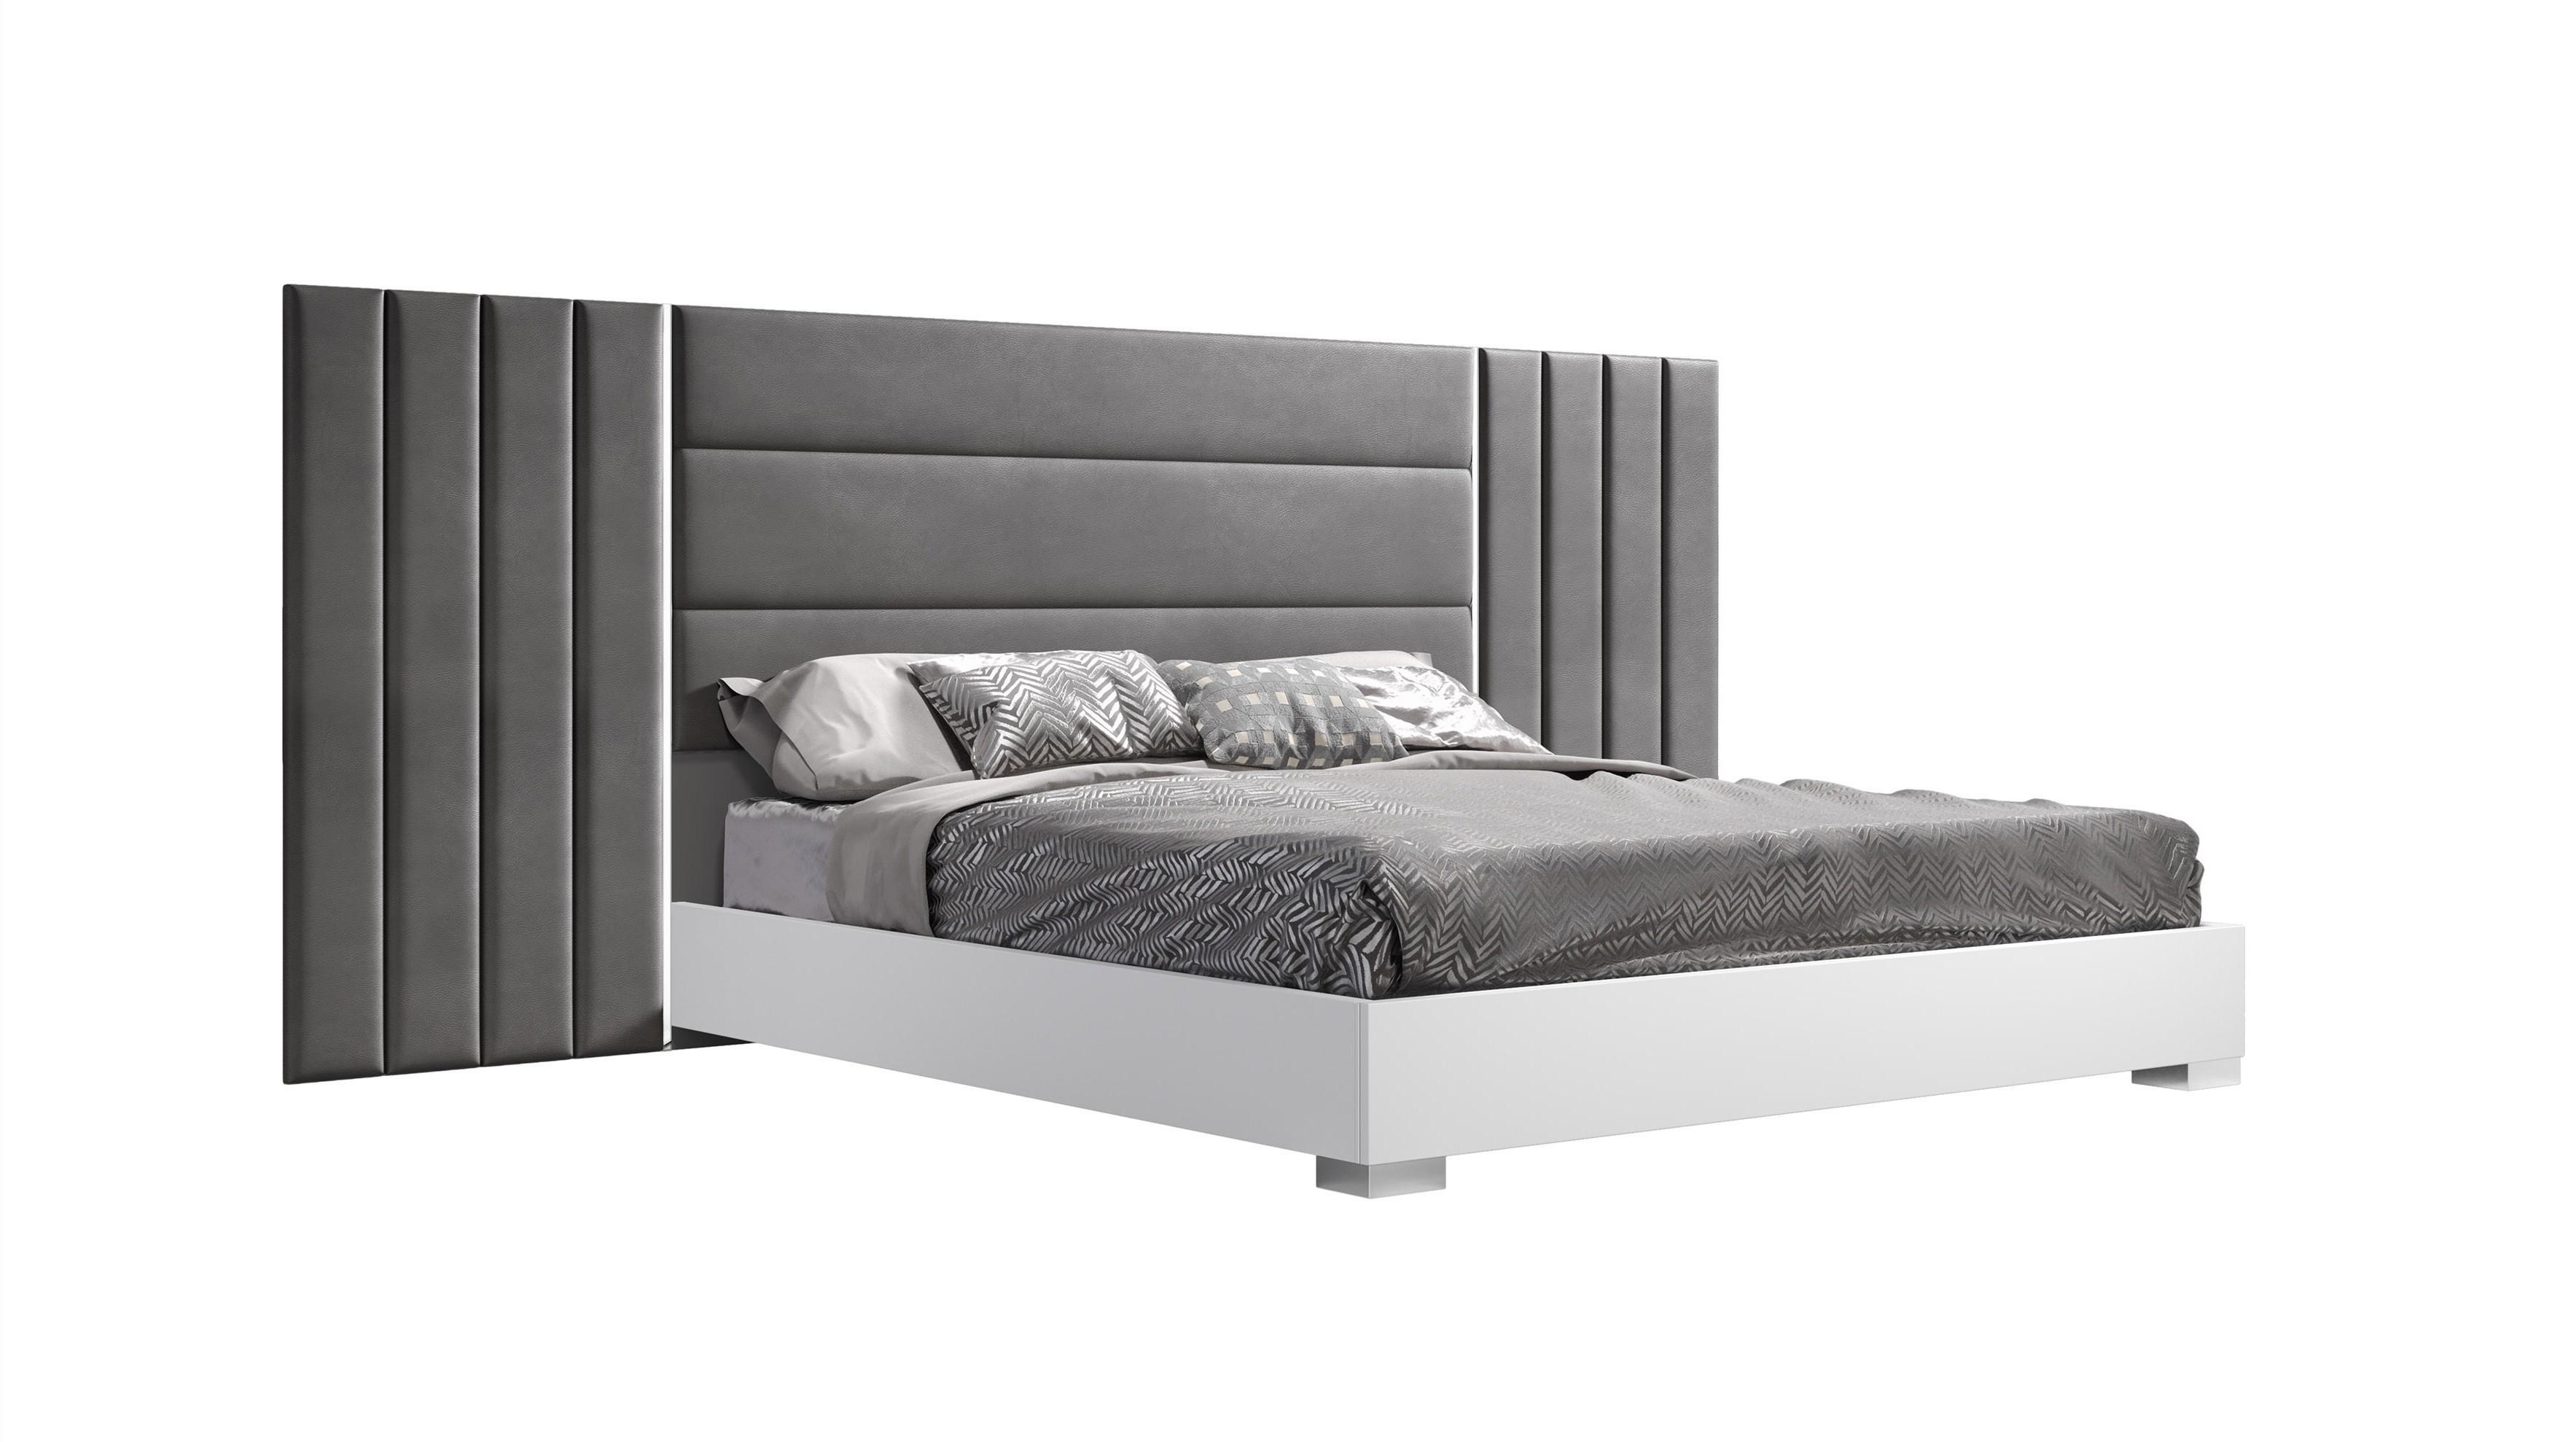 

    
Contemporary Gray and White Composite Wood Queen Bed J&M Furniture Nina 18332-Q
